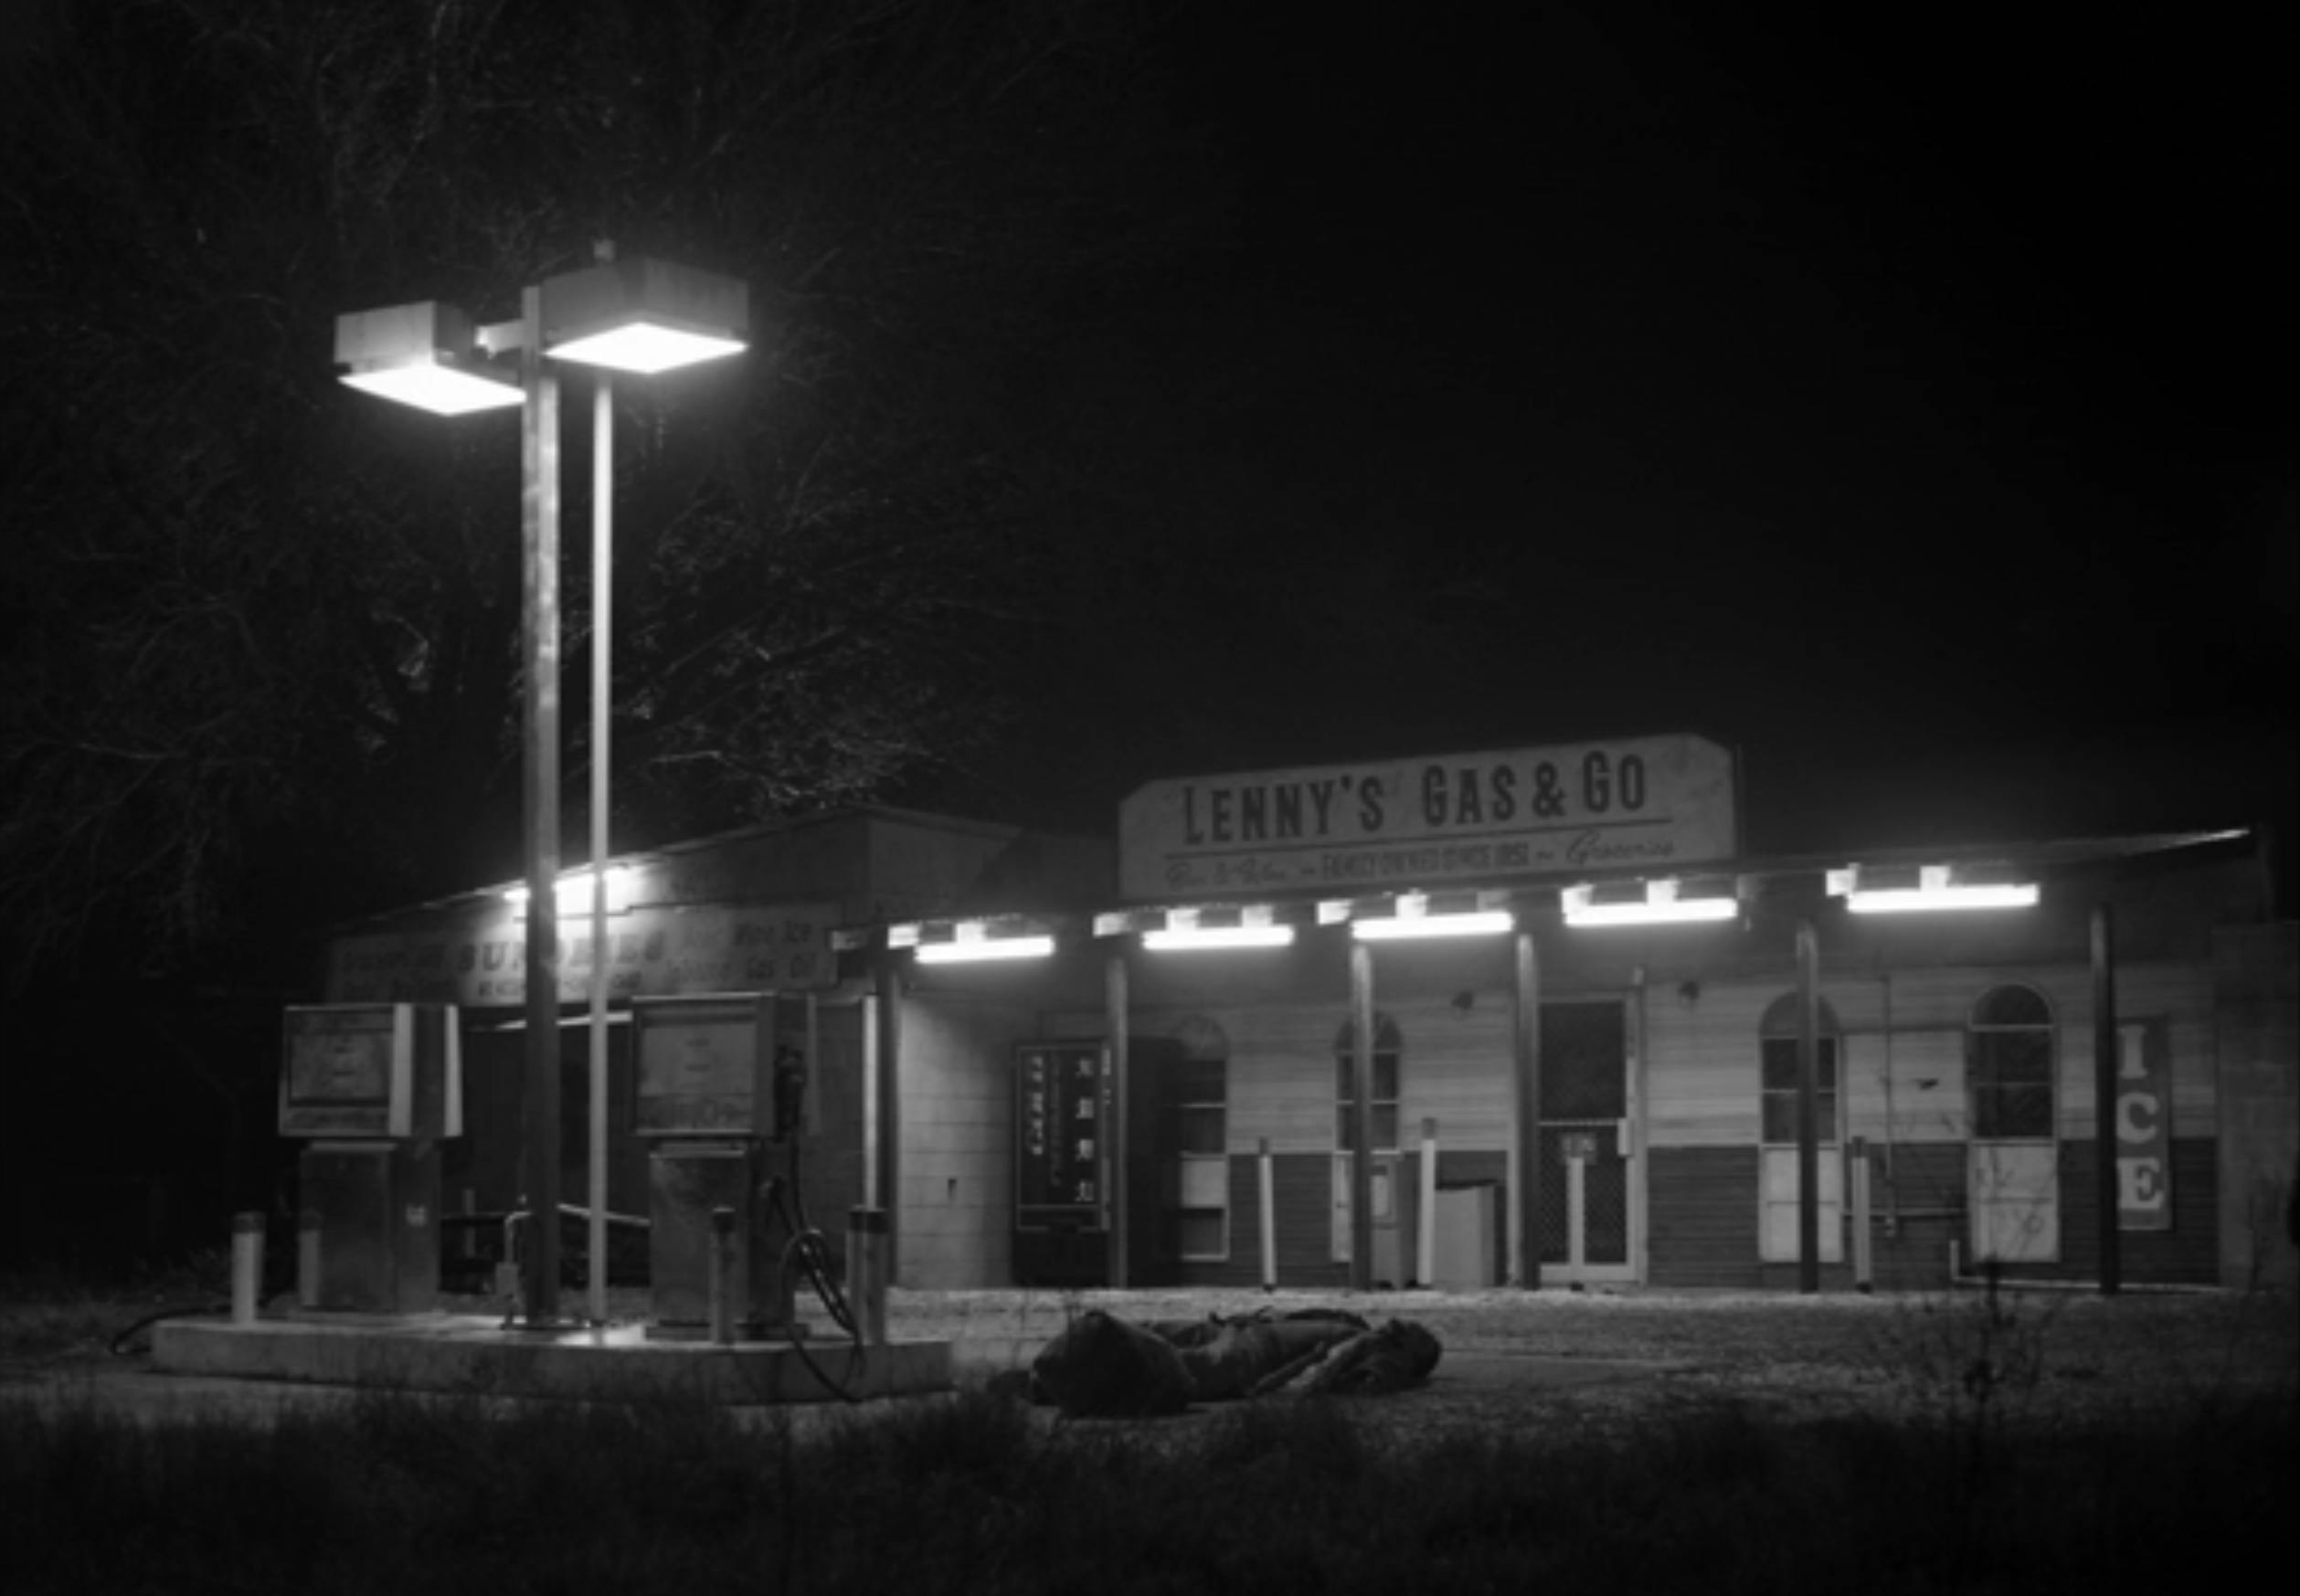 A black and white image of an old gas station